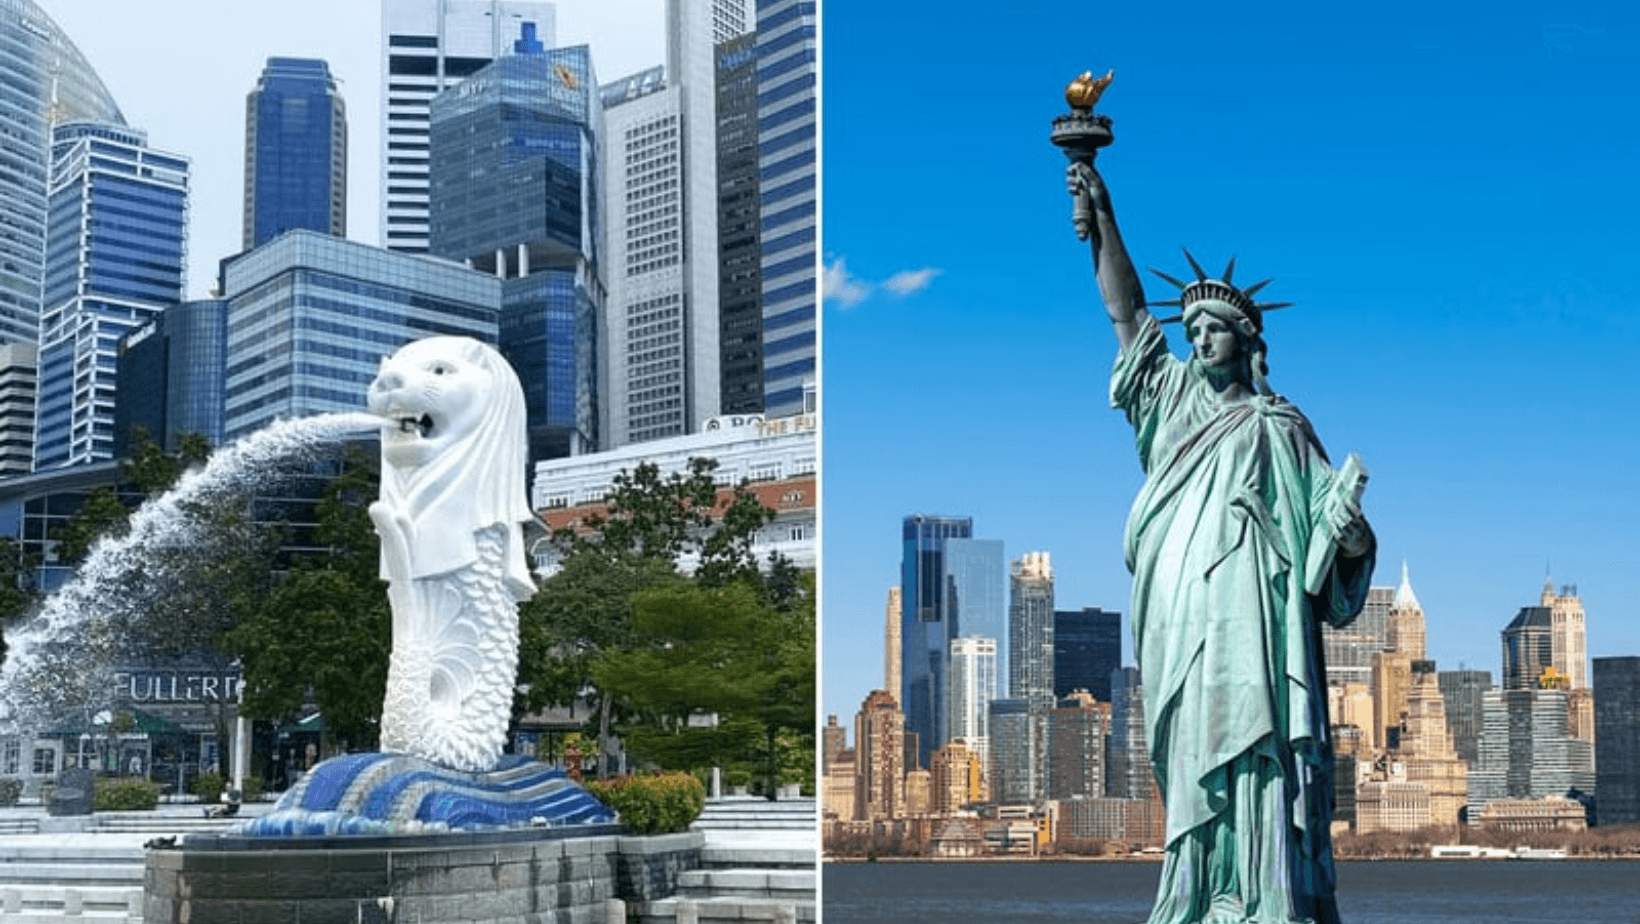 Singapore, Zurich overtake New York to become world’s most expensive cities